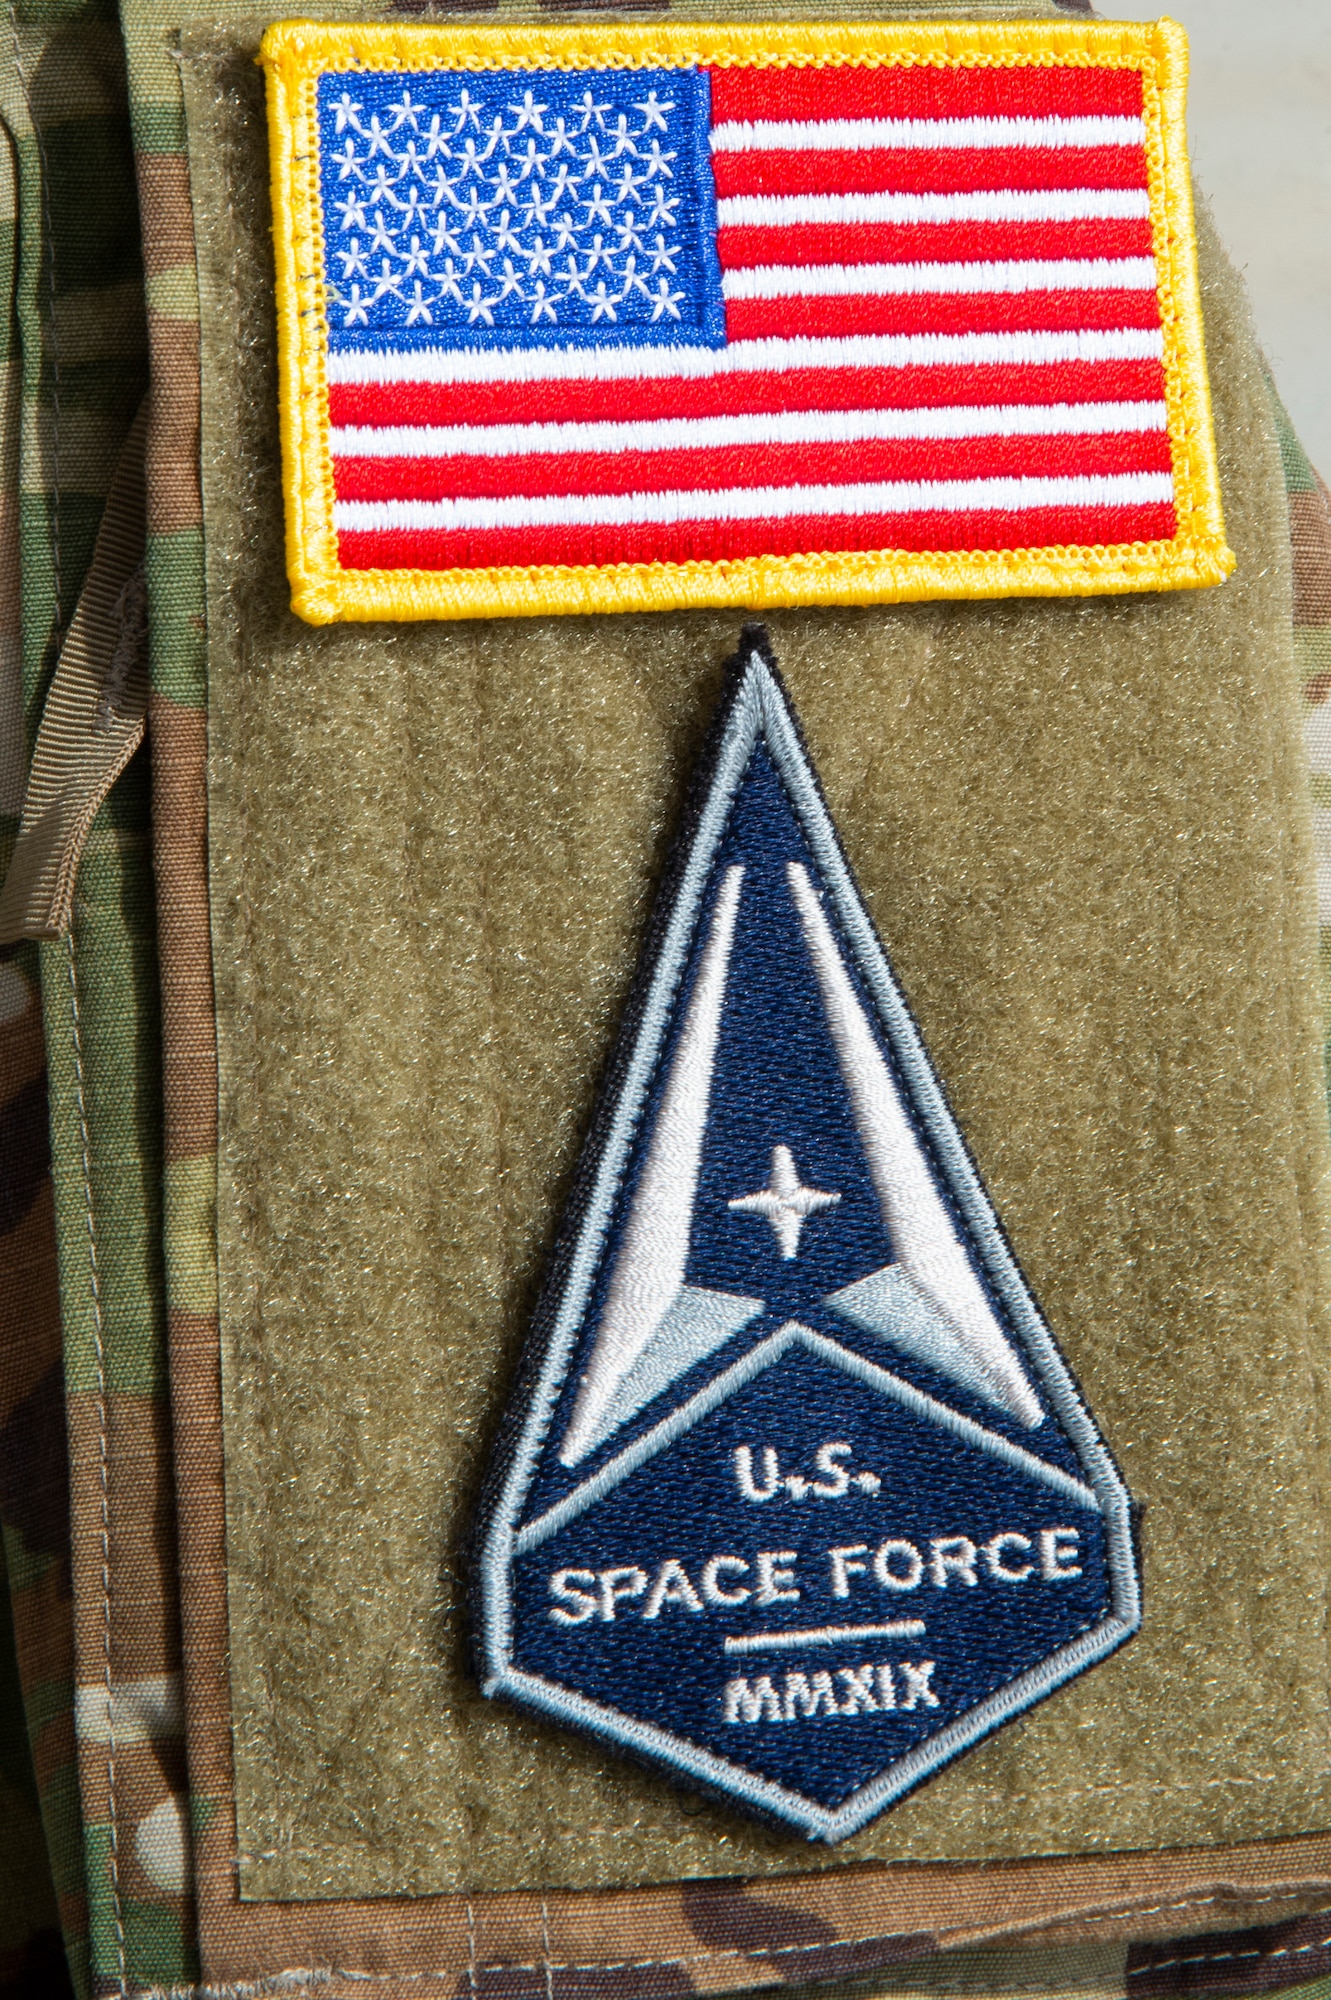 The U.S. Space Force was established on Dec. 20, 2019 and on Feb. 1, 2021, the first eight Airmen assigned to the 6th Air Refueling Wing, MacDill Air Force Base, Fla., participate in a U.S. Space Force oath of enlistment ceremony in Tampa.